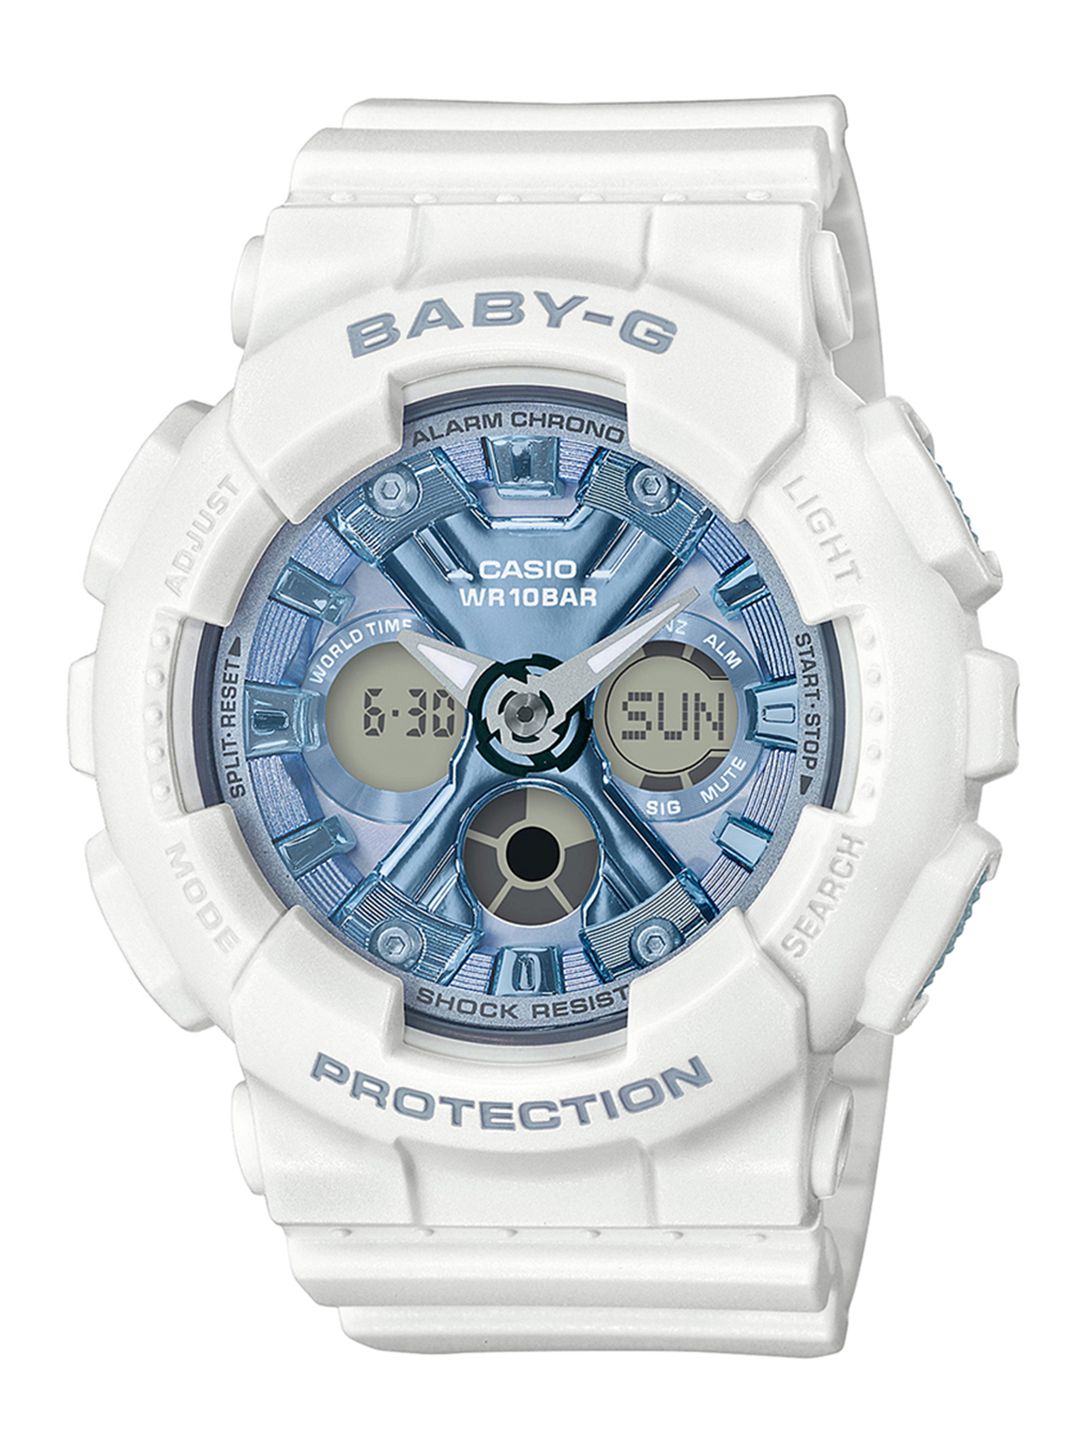 CASIO Baby-G Women Blue Analogue and Digital Watch BX169 BA-130-7A2DR Price in India